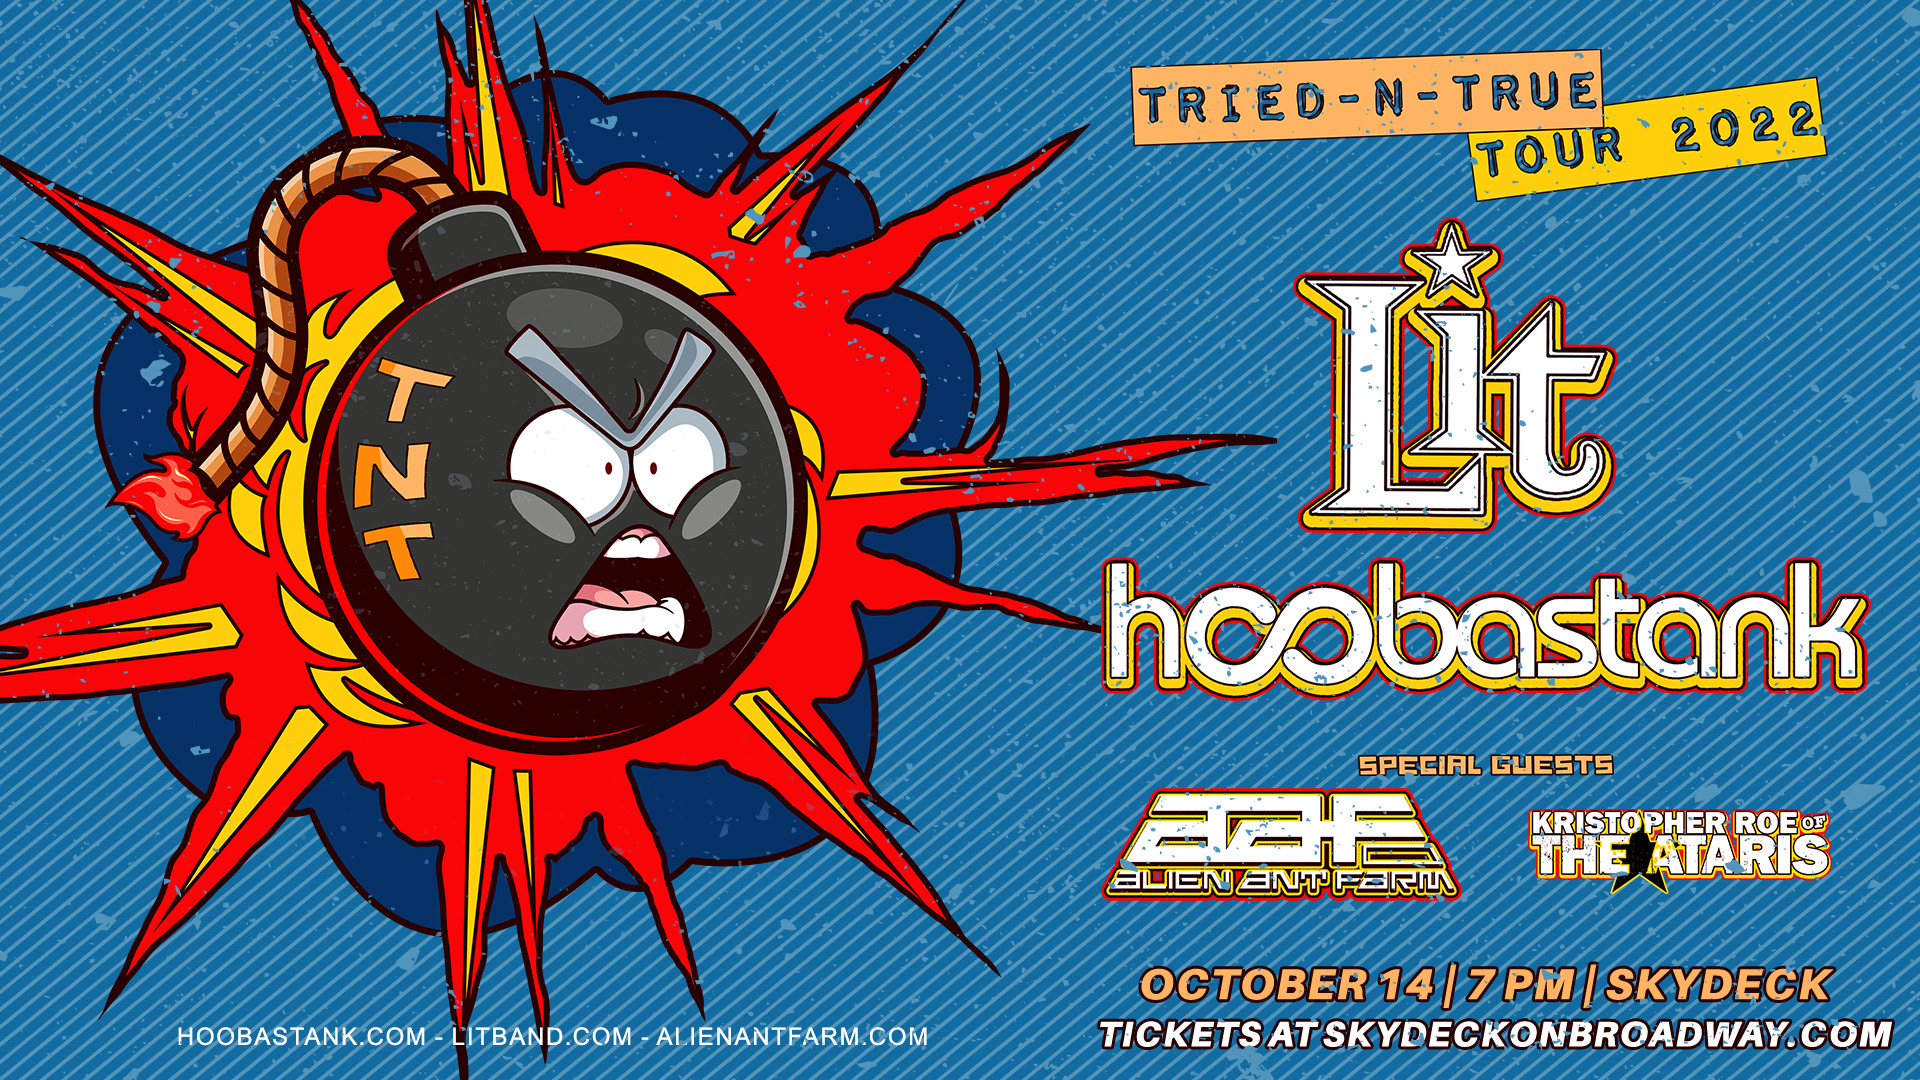 Promo image of Lit & Hoobastank: Tried & True Tour with special guests Alien Ant F...